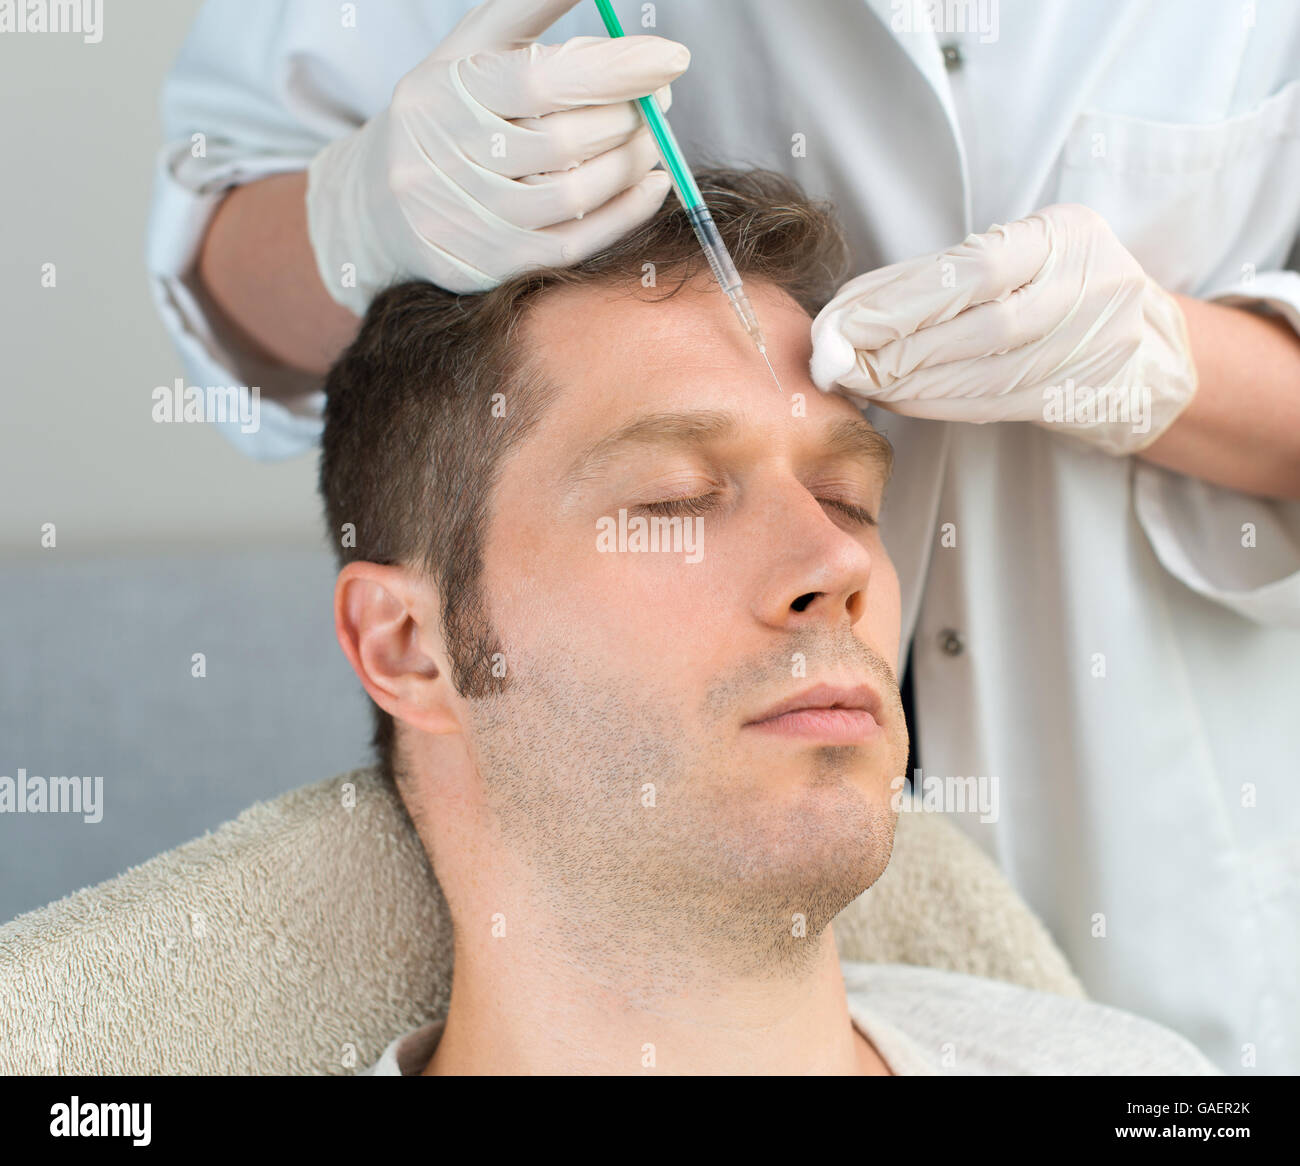 Handsome man is getting injection. Concept of aesthetic beauty. Stock Photo